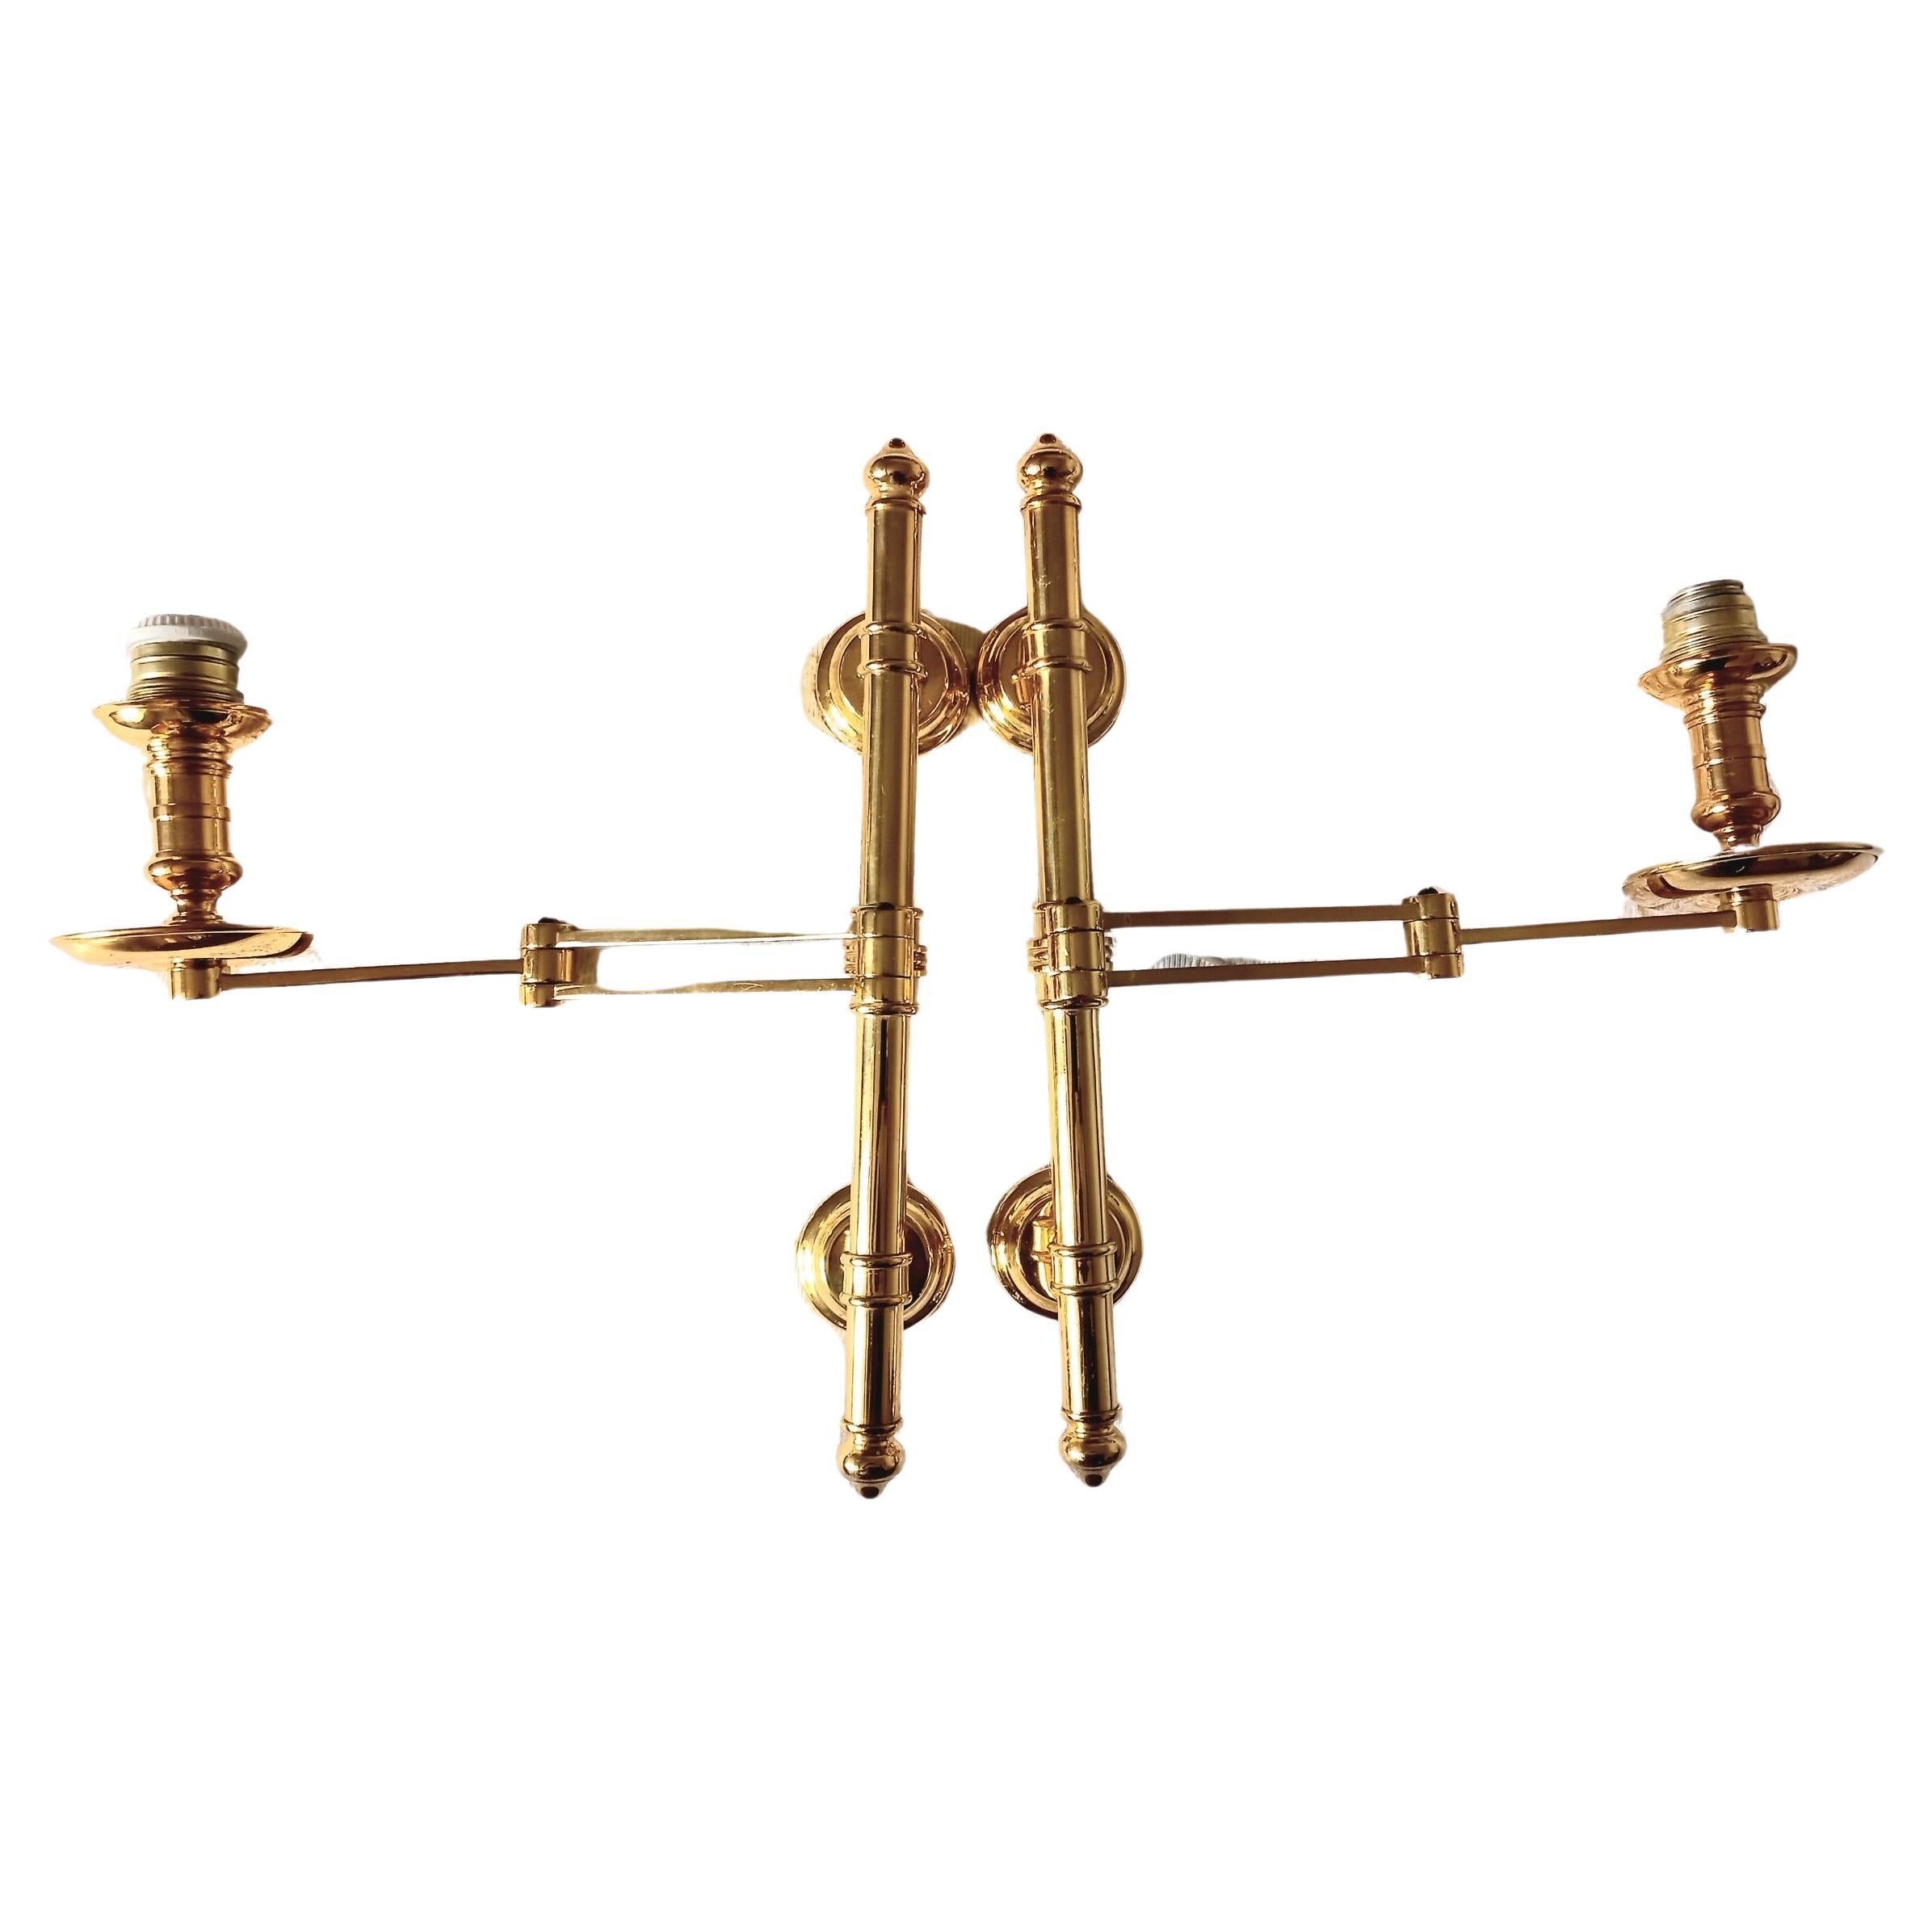  Pair of French Mison Jansen Swing Arm Sconces